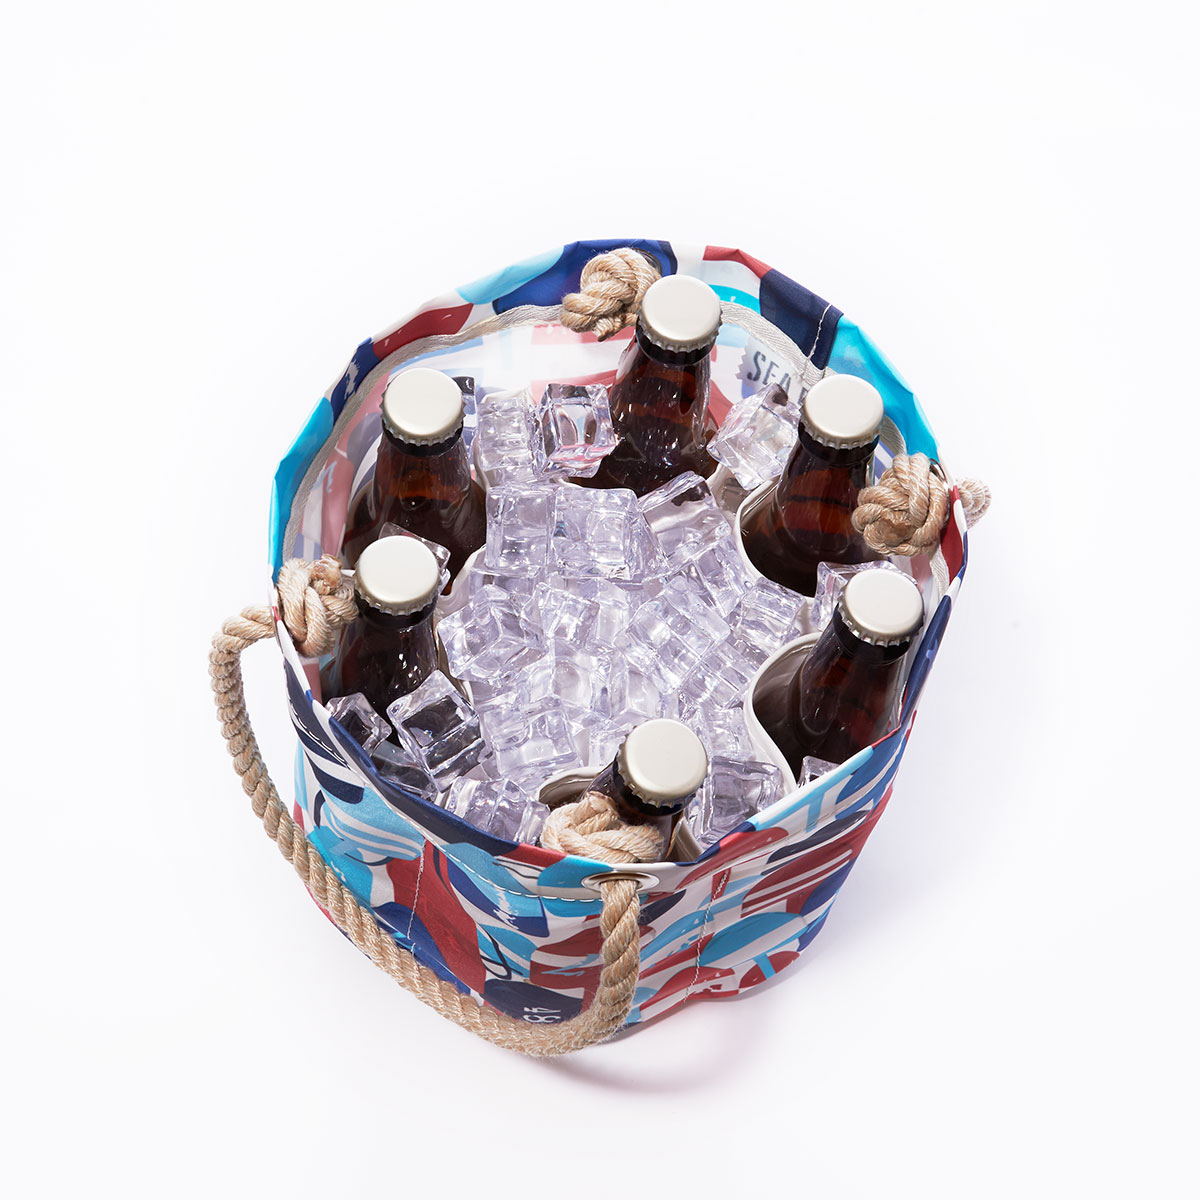 inside view with bottles and ice: a recycled sail cloth beverage bucket bag with hemp rope handles is emblazoned with a variety of printed buoys in reds and blues in different shapes and sizes